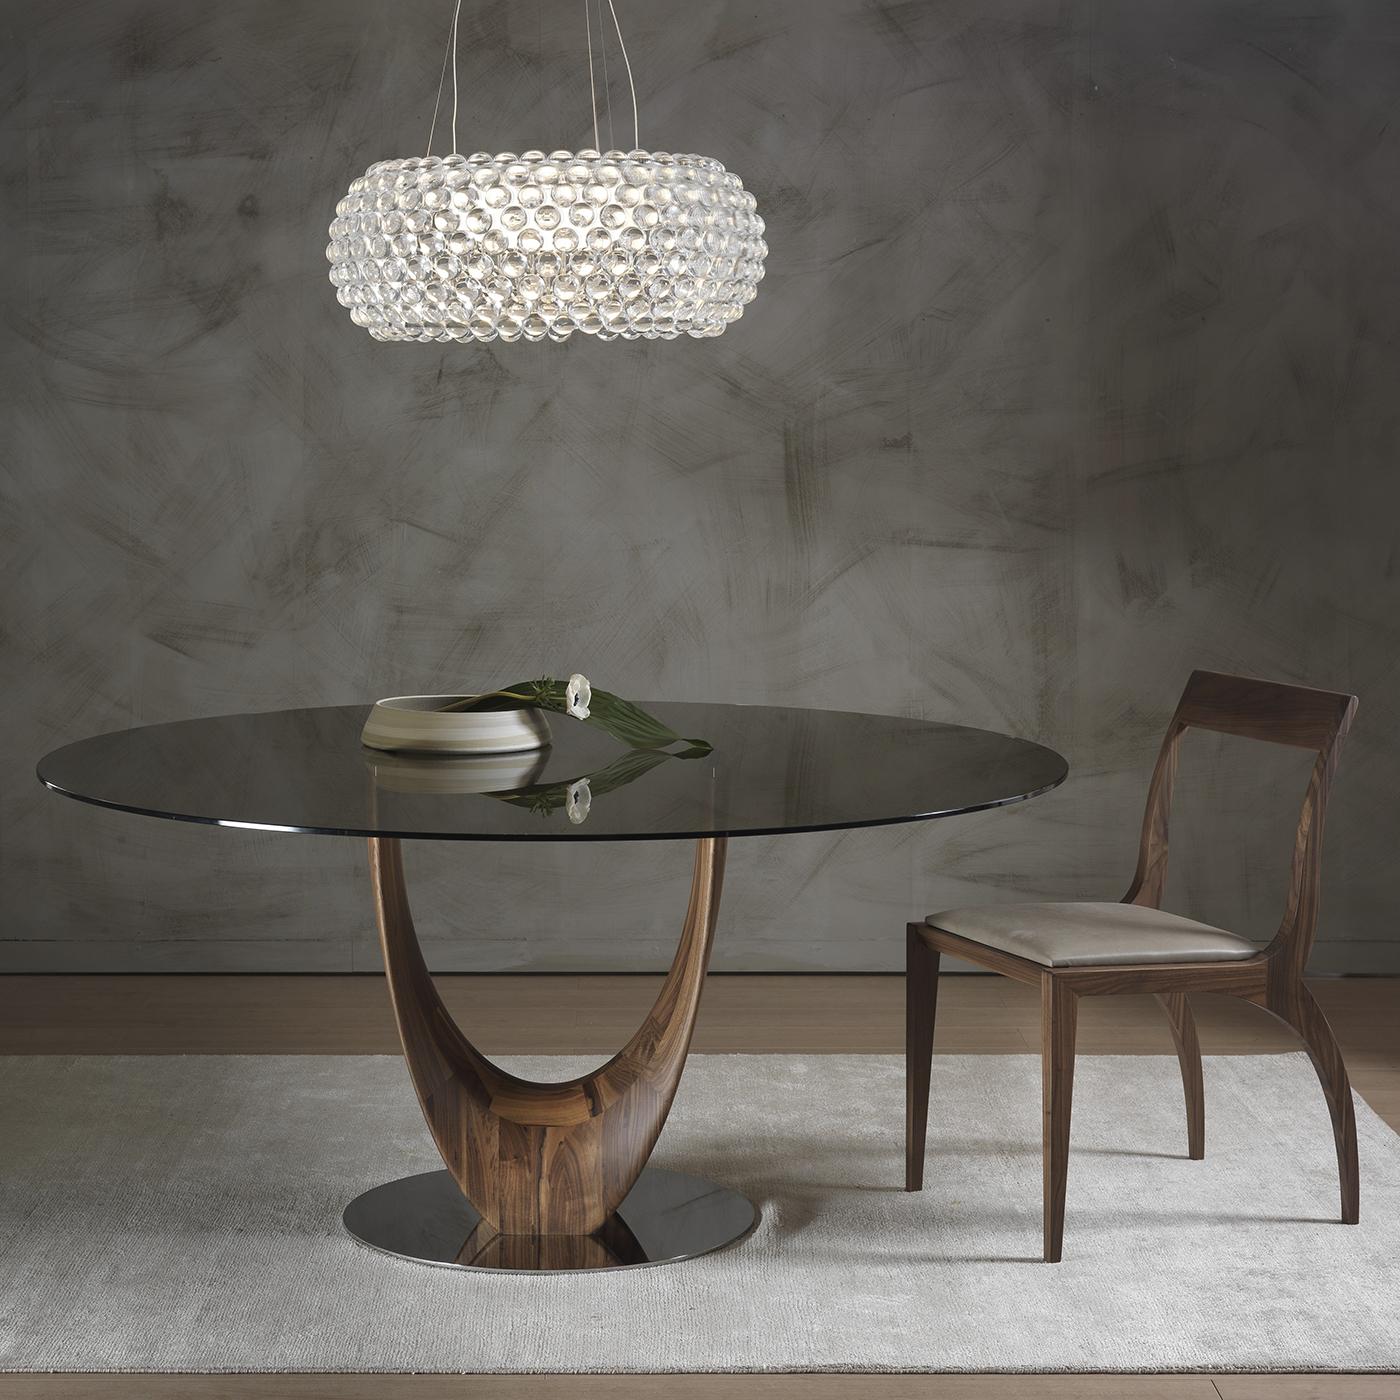 This elegant and modern dining table designed by Stefano Bigi features a stunning base in solid Canaletto walnut. The structure rests on a round element in chrome-plated metal and curves to form two separate legs that create a delicate sense of